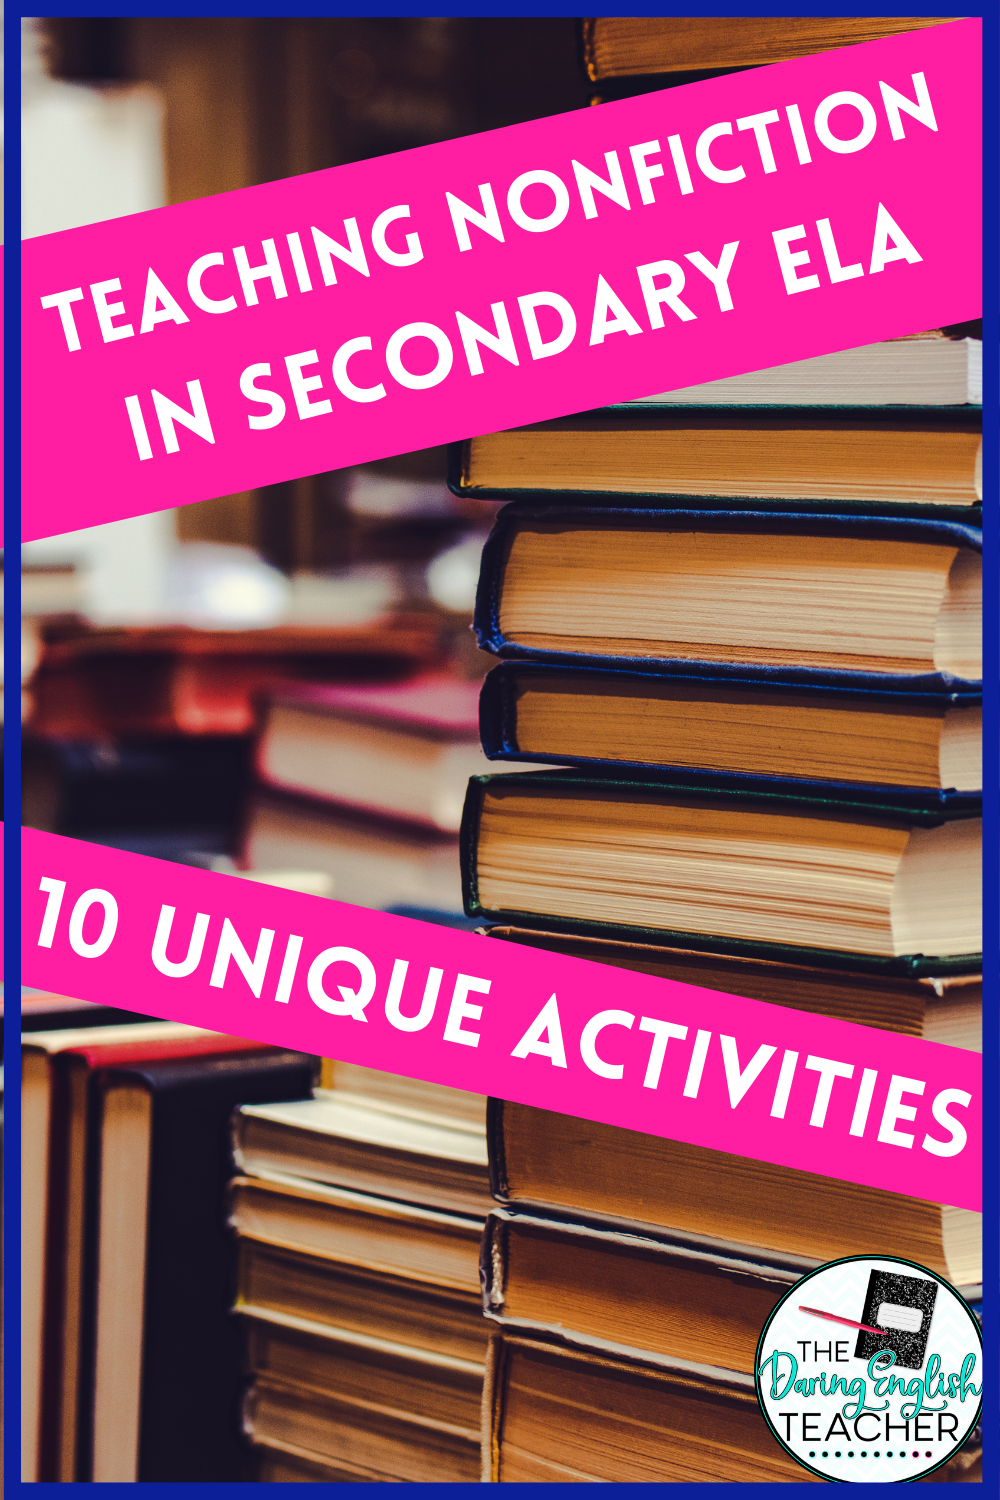 Teaching Nonfiction: 10 Engaging Ways to Teach Nonfiction in Secondary ELA